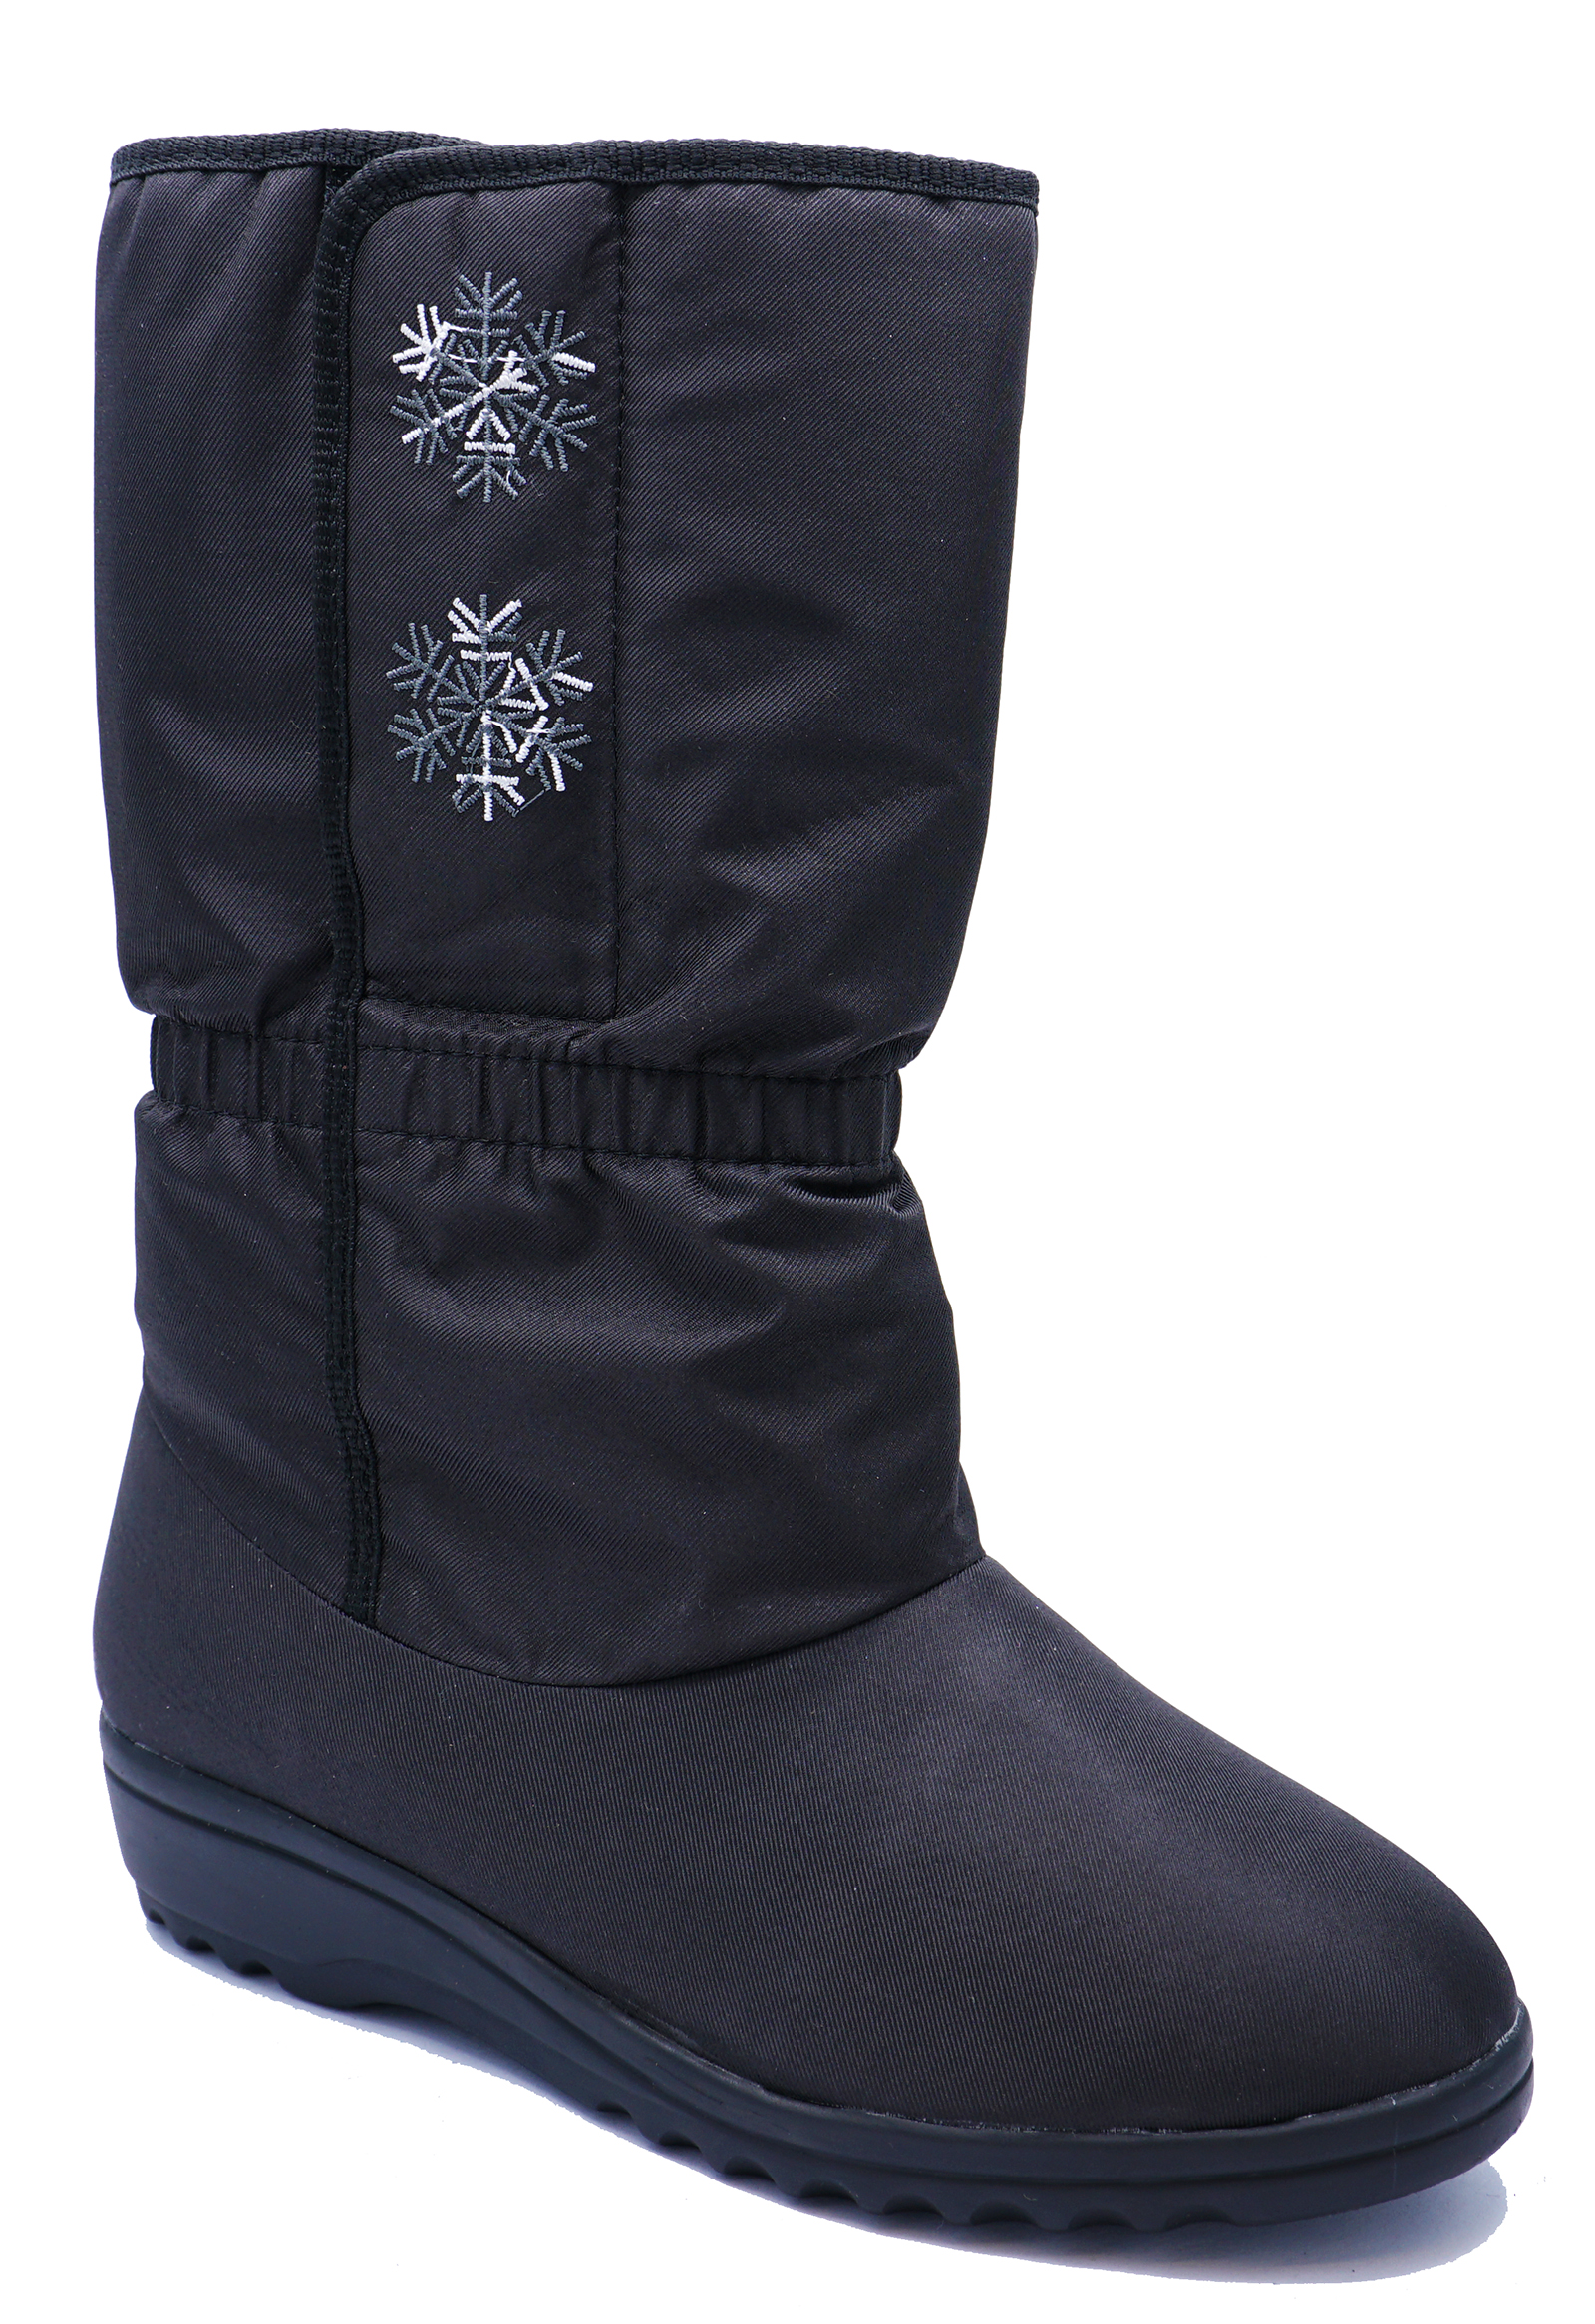 LADIES BLACK WATERPROOF BREATHABLE WINTER SNOW THERMAL BLIZZARD BOOTS ...